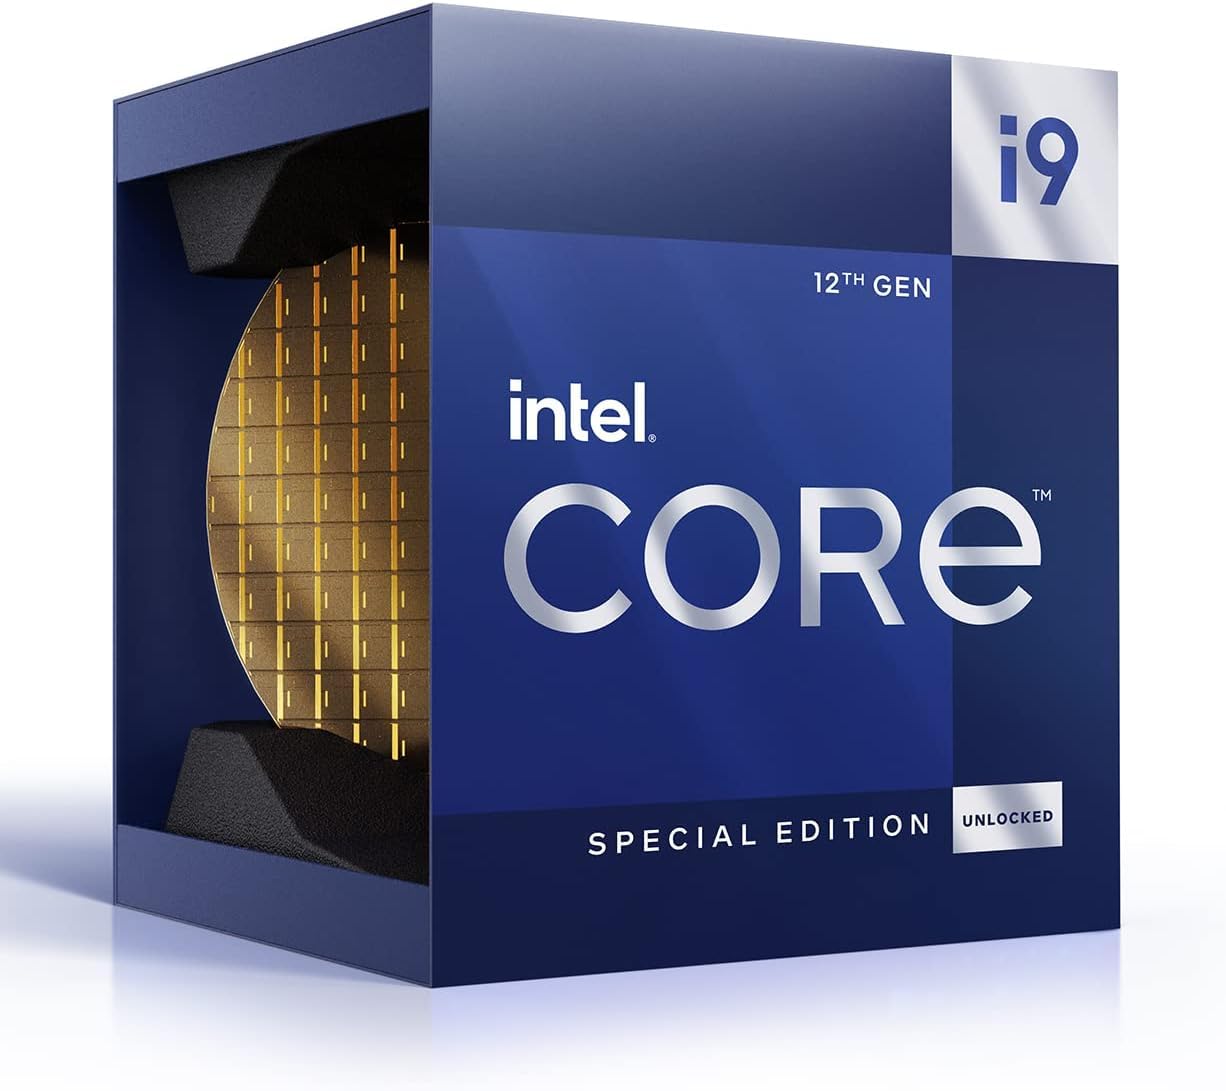 $332: Intel Core i9 (12th Gen) i9-12900KS Gaming Desktop Processor with Integrated Graphics and Hexadeca-core (16 Core) 2.50 GHz